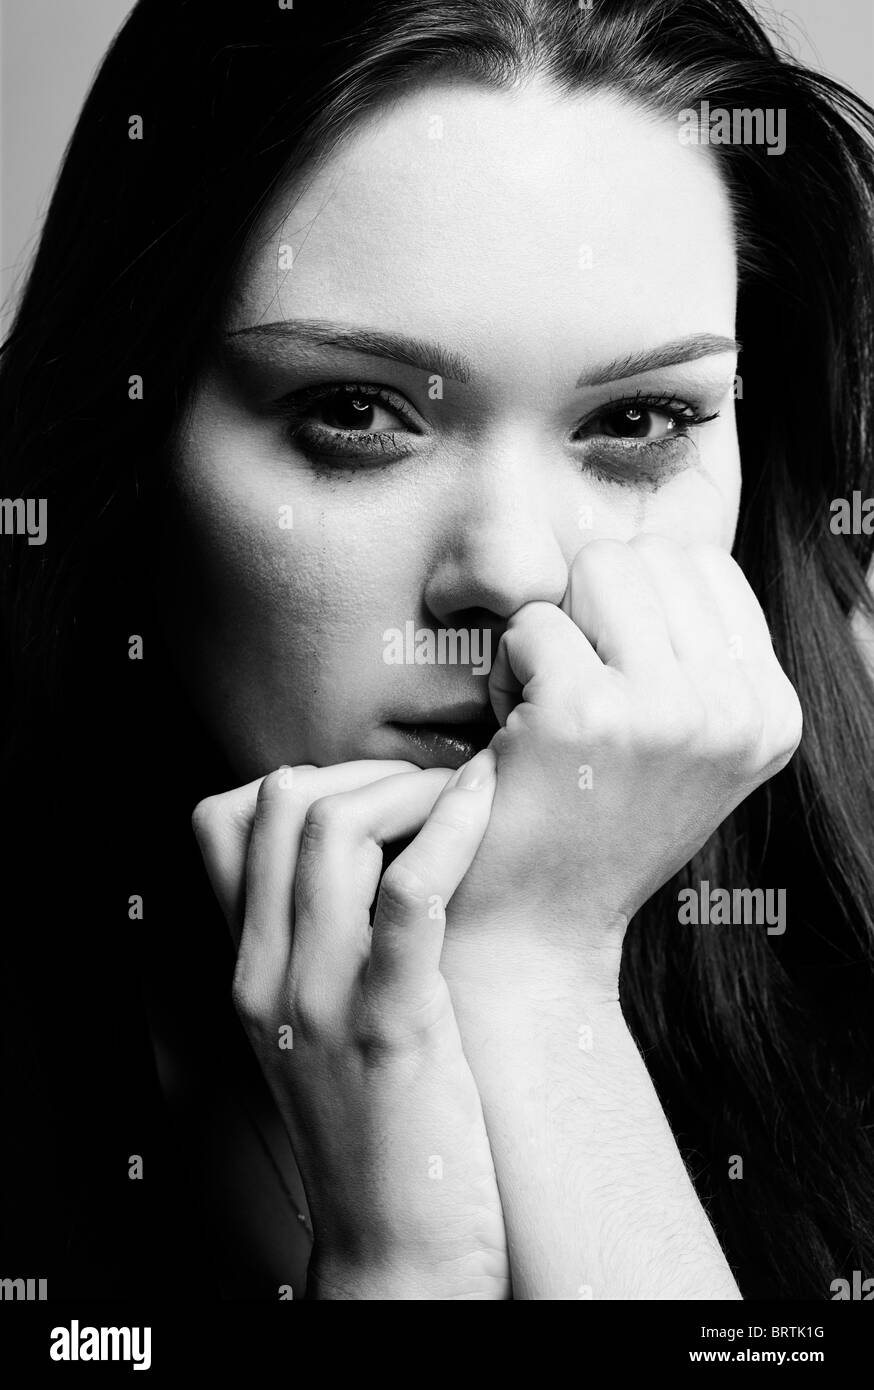 portrait of beautiful crying girl with smeared mascara hiding her face in hands Stock Photo